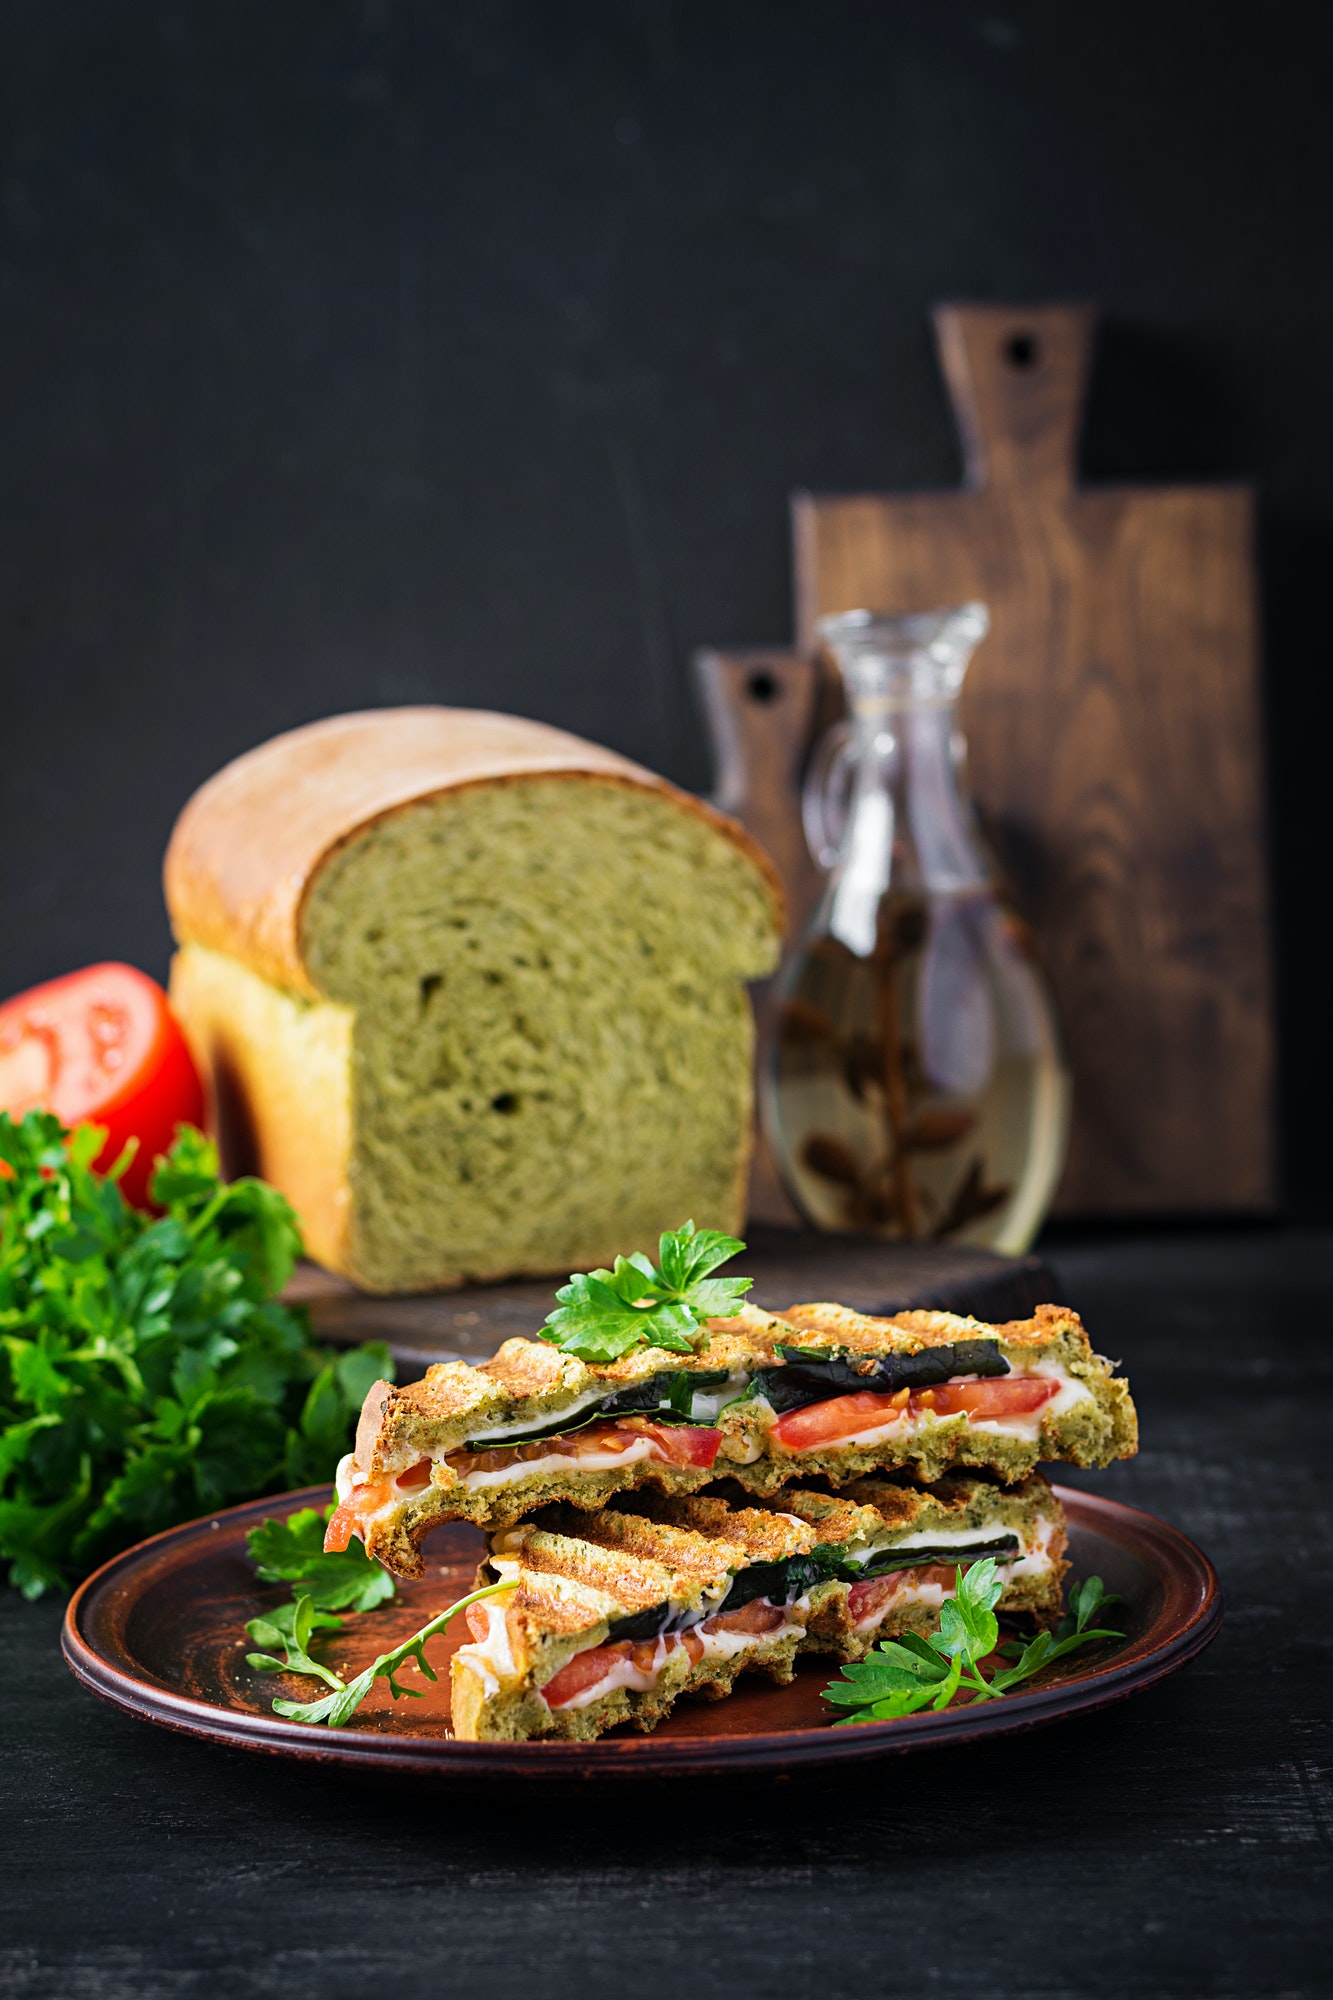 vegetarian-sandwich-panini-with-spinach-leaves-tomatoes-and-cheese.jpg